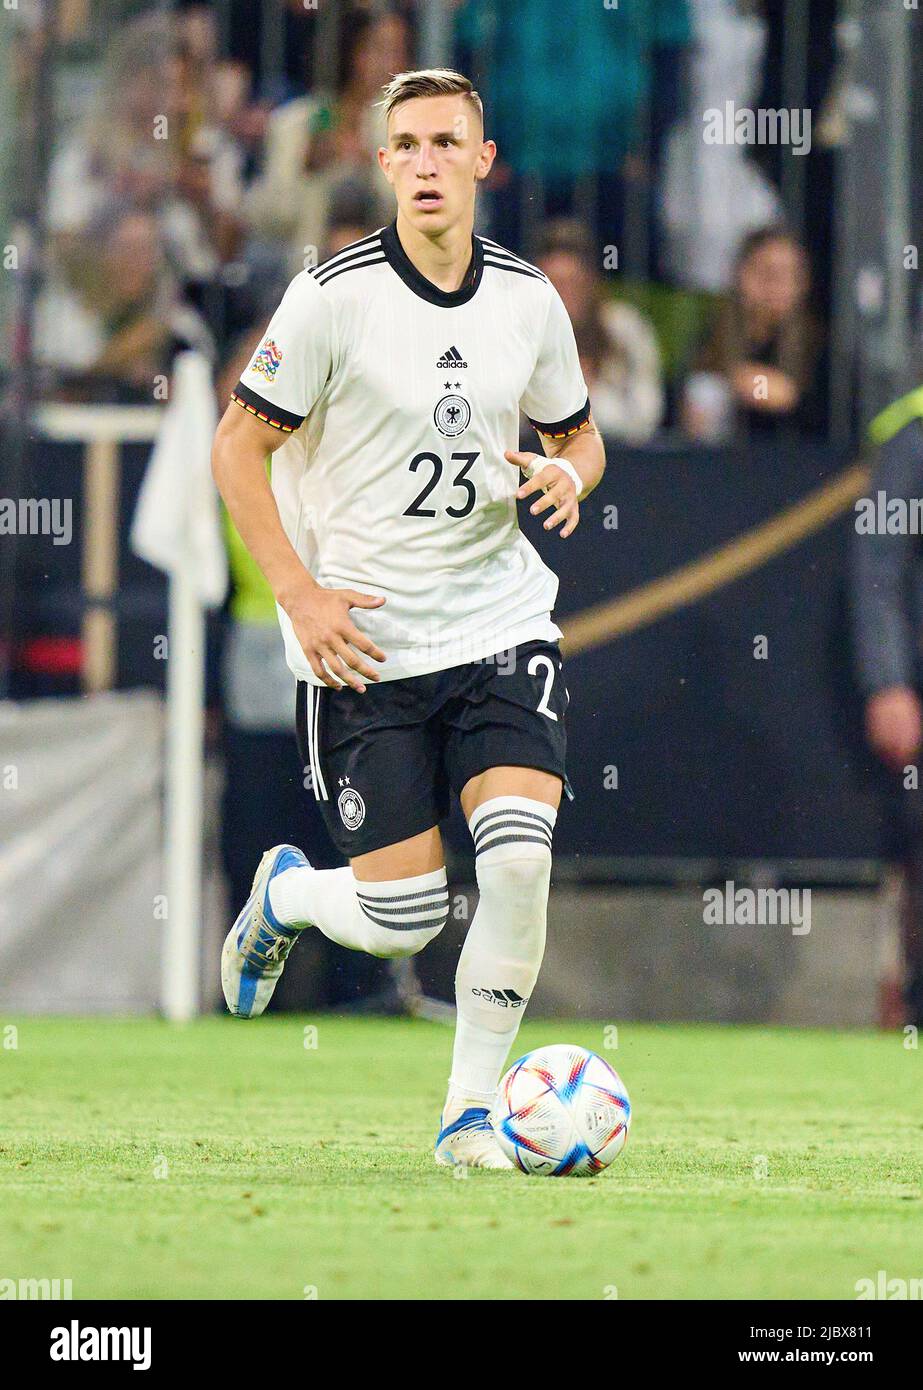 Nico Schlotterbeck, DFB 23  in the UEFA Nations League 2022 match GERMANY - ENGLAND 1-1  in Season 2022/2023 on Juni 07, 2022  in Munich, Germany.  © Peter Schatz / Alamy Live News Stock Photo